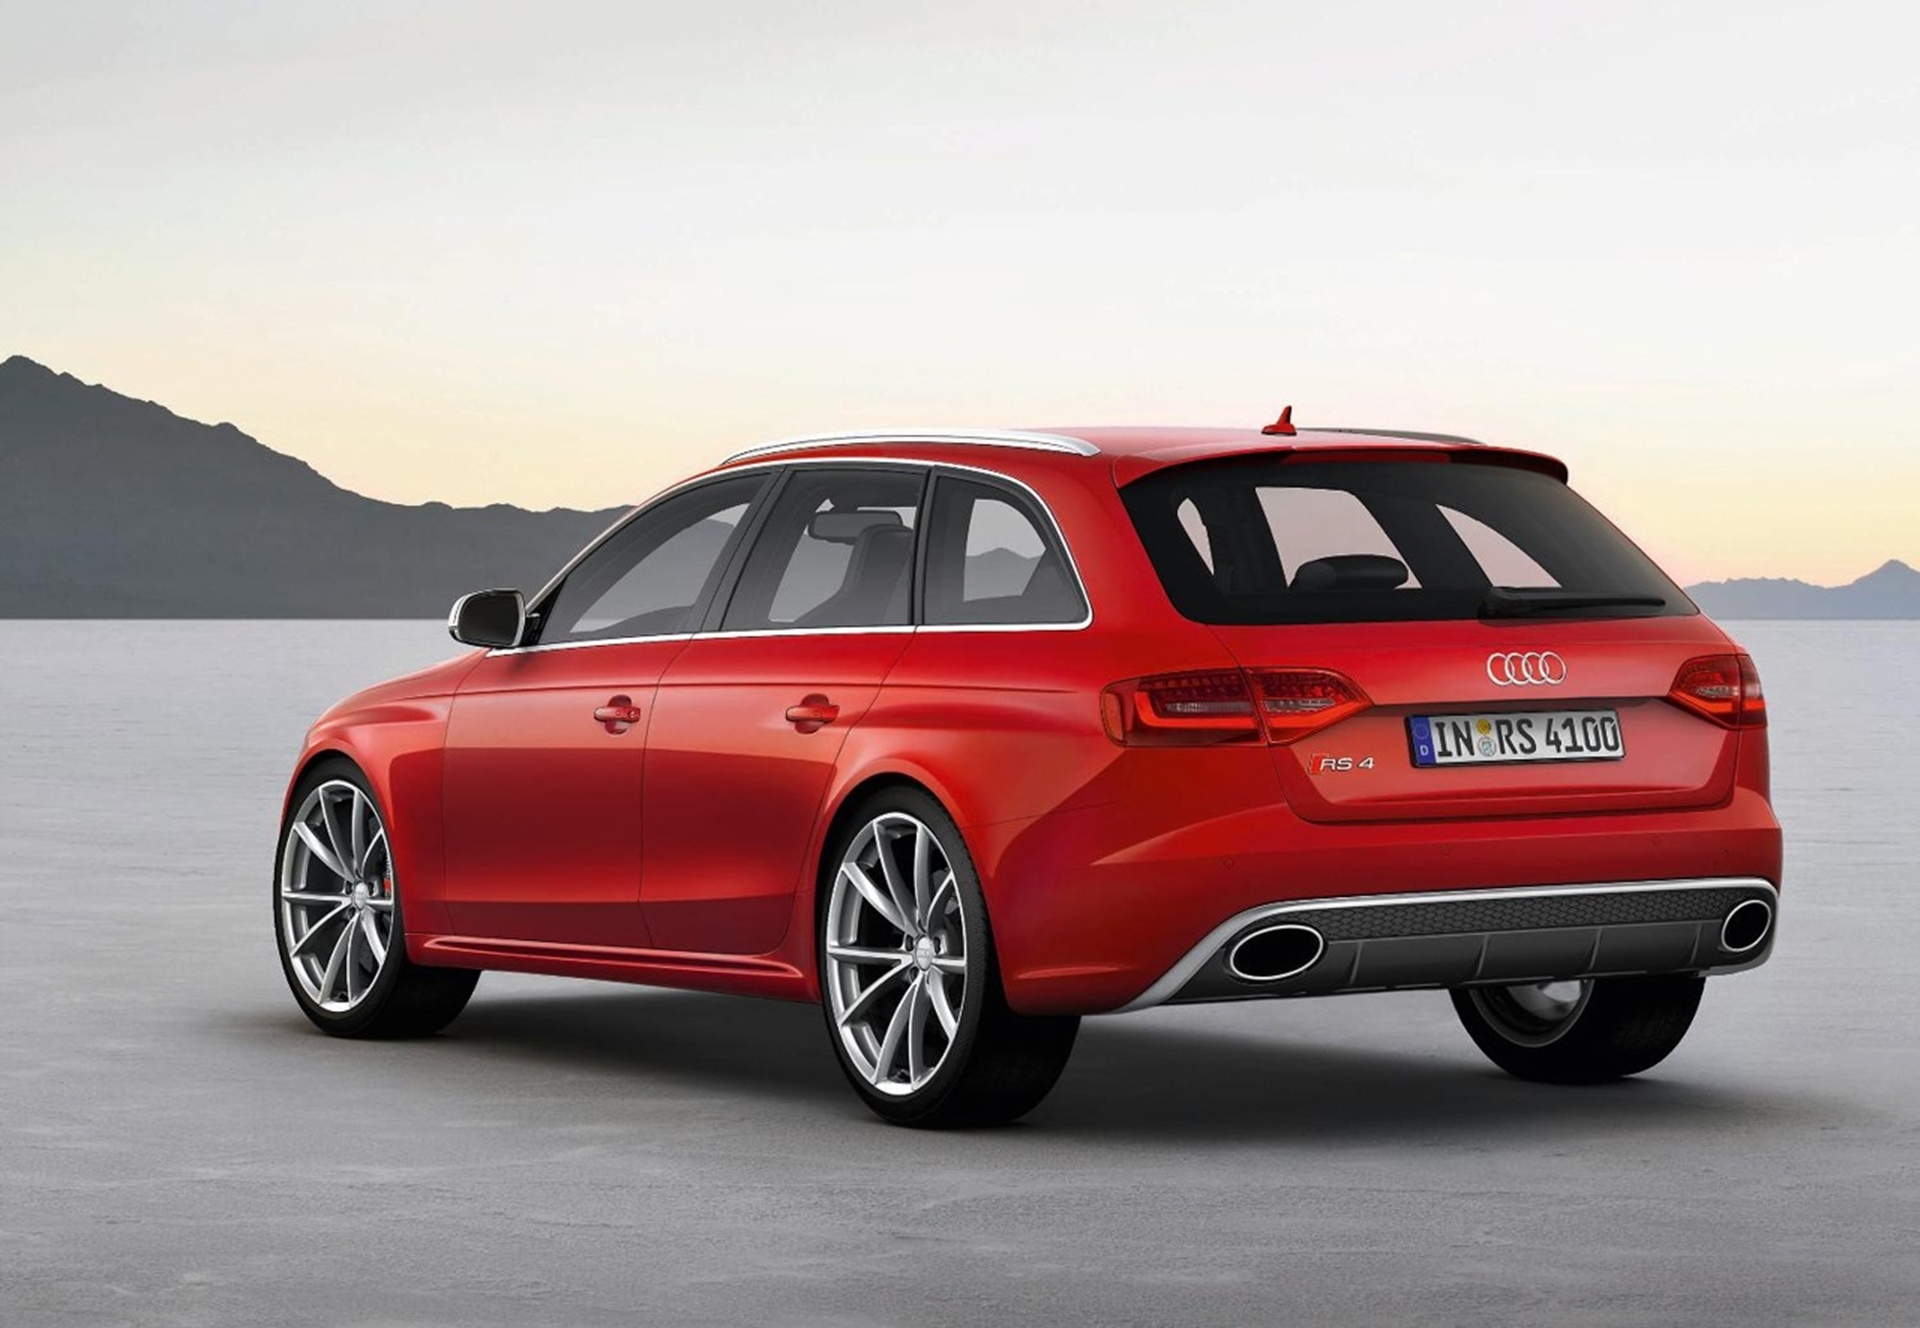 ALL-NEW AUDI RS 4 AVANT TAKES PRACTICALITY TO EVEN GREATER EXTREMES